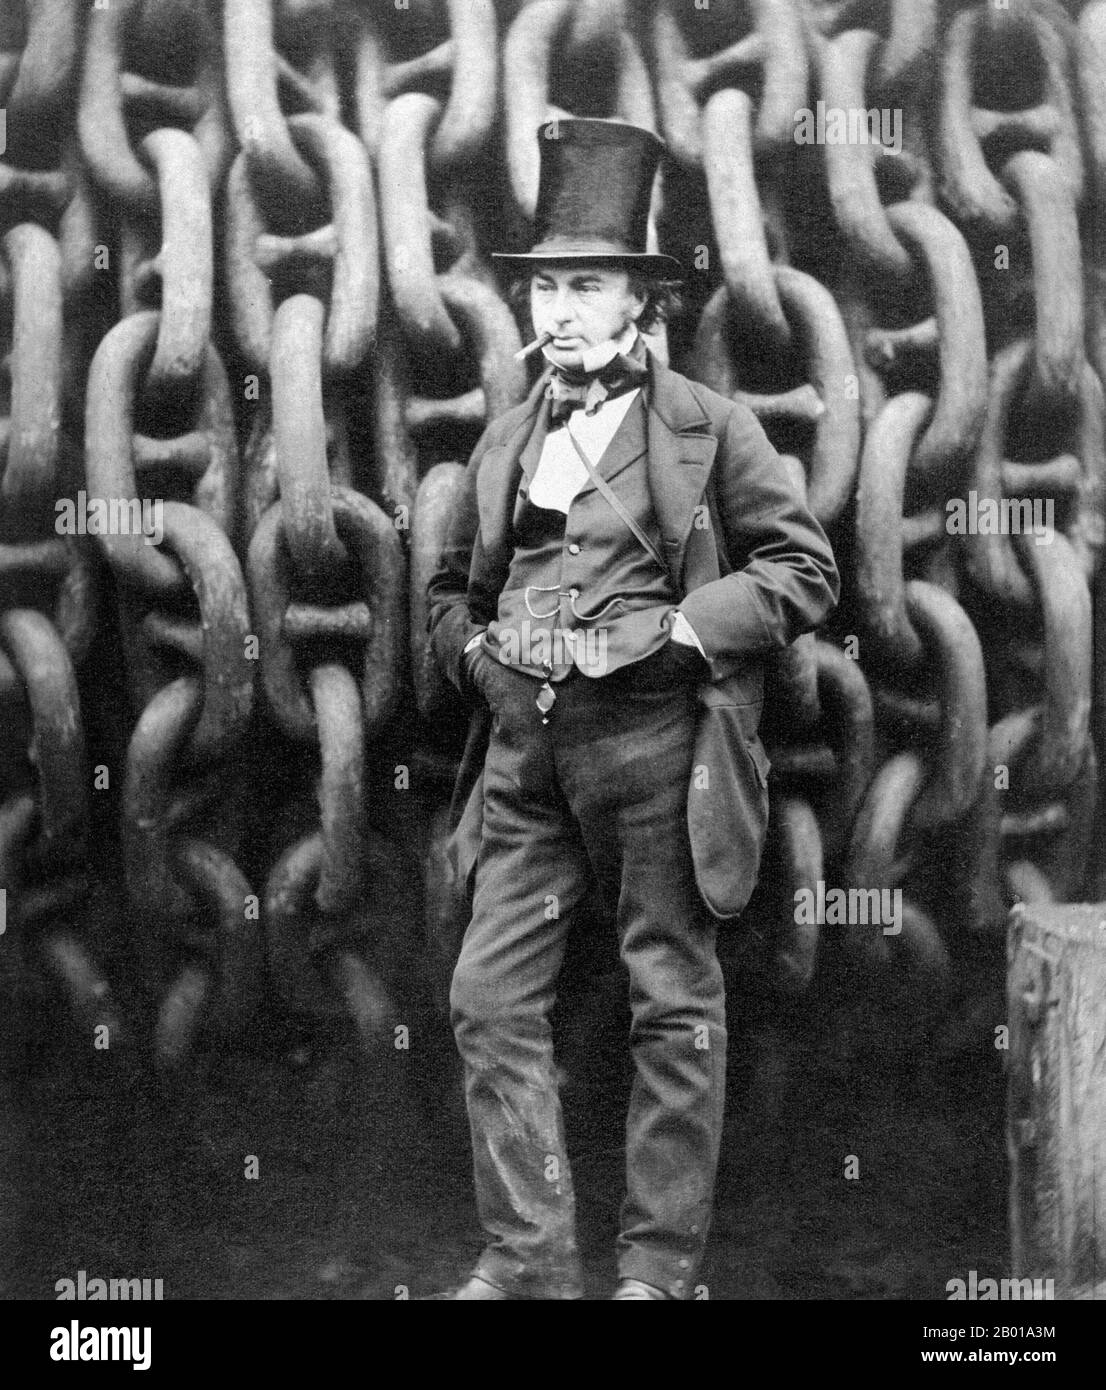 England/UK: Isambard Kingdom Brunel (9 April 1806 - 15 September 1859), by the launching chains of the Great Eastern at Millwall. Photo by Robert Howlett (1831-1858), 1857.  Isambard Kingdom Brunel, FRS, was a leading British civil engineer, famed for his bridges and dockyards, and especially for the construction of the first major British railway, the Great Western Railway; a series of famous steamships, including the first propeller-driven transatlantic steamship; and numerous important bridges and tunnels. His designs revolutionised public transport and modern engineering. Stock Photo